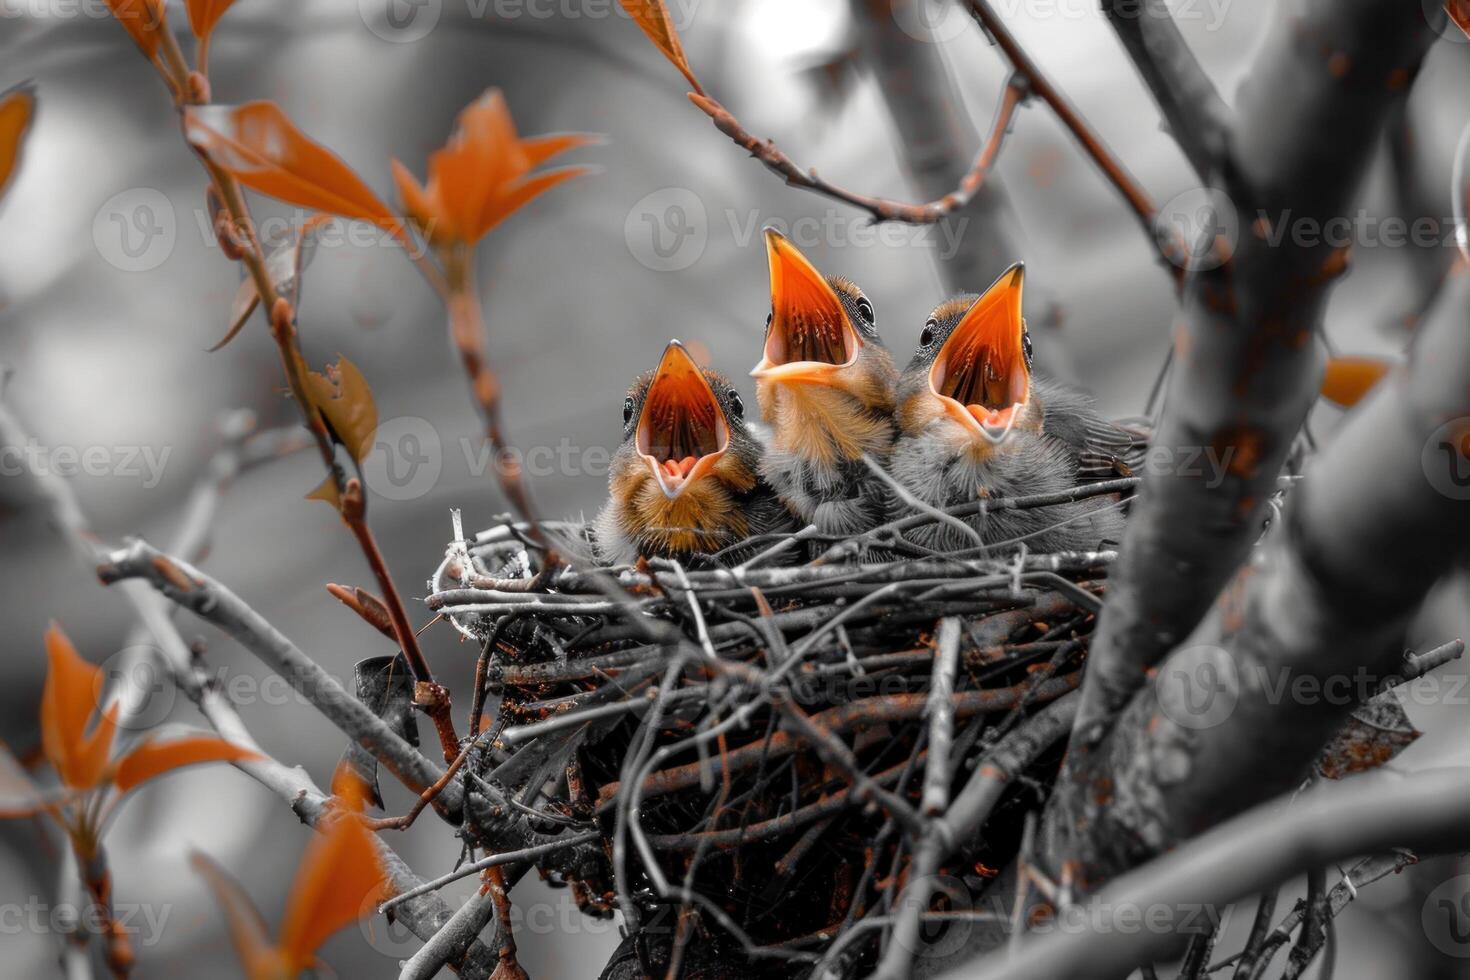 Three baby birds are sitting in a nest, one of which is eating photo